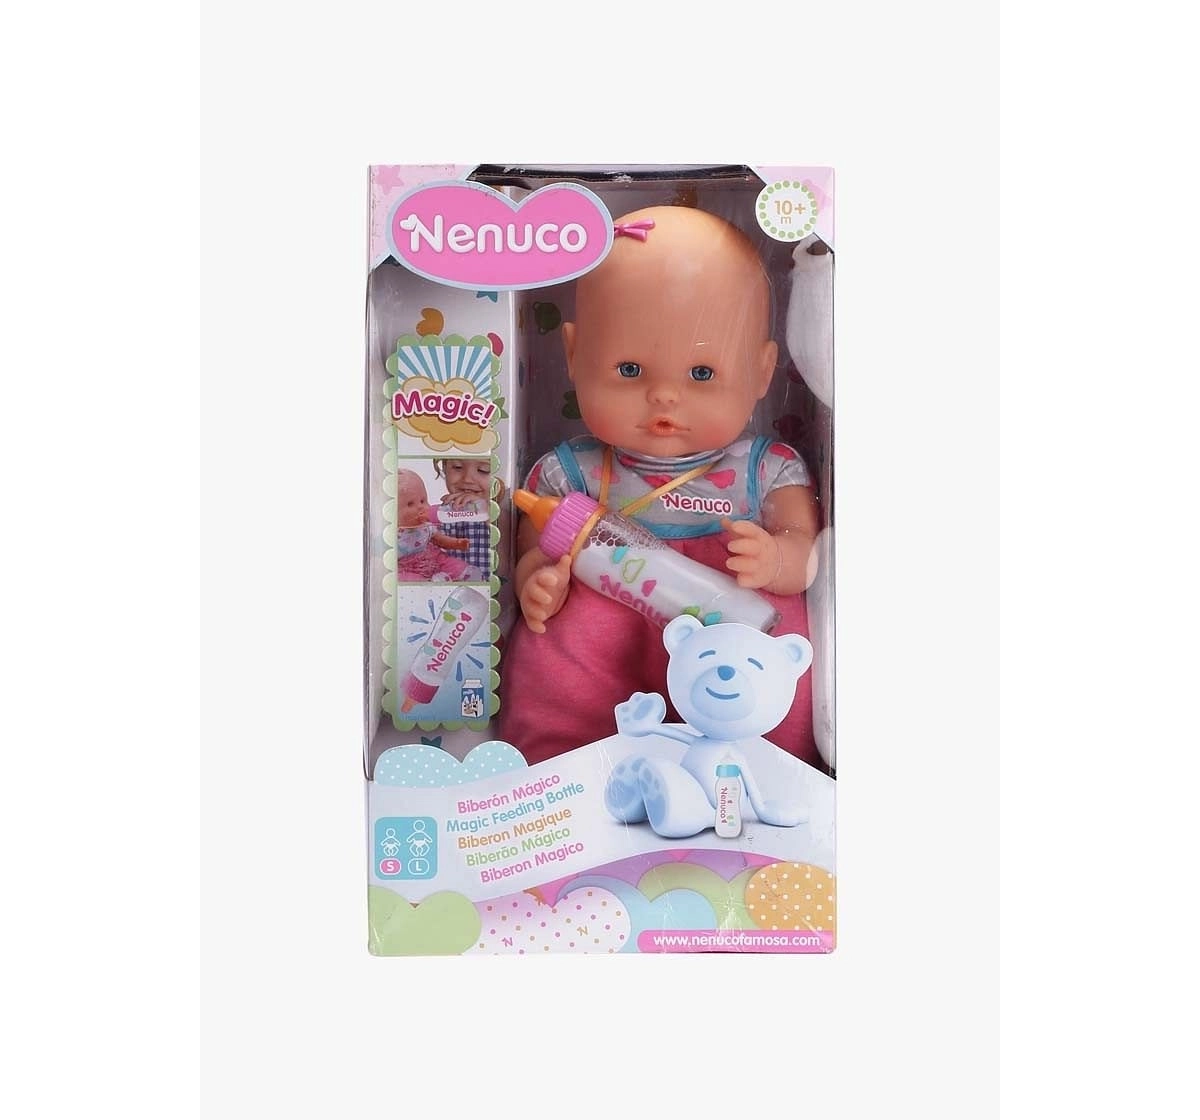 Brown Nenuco With Magic Feeding Bottle Dolls & Accessories for age 10M+ 